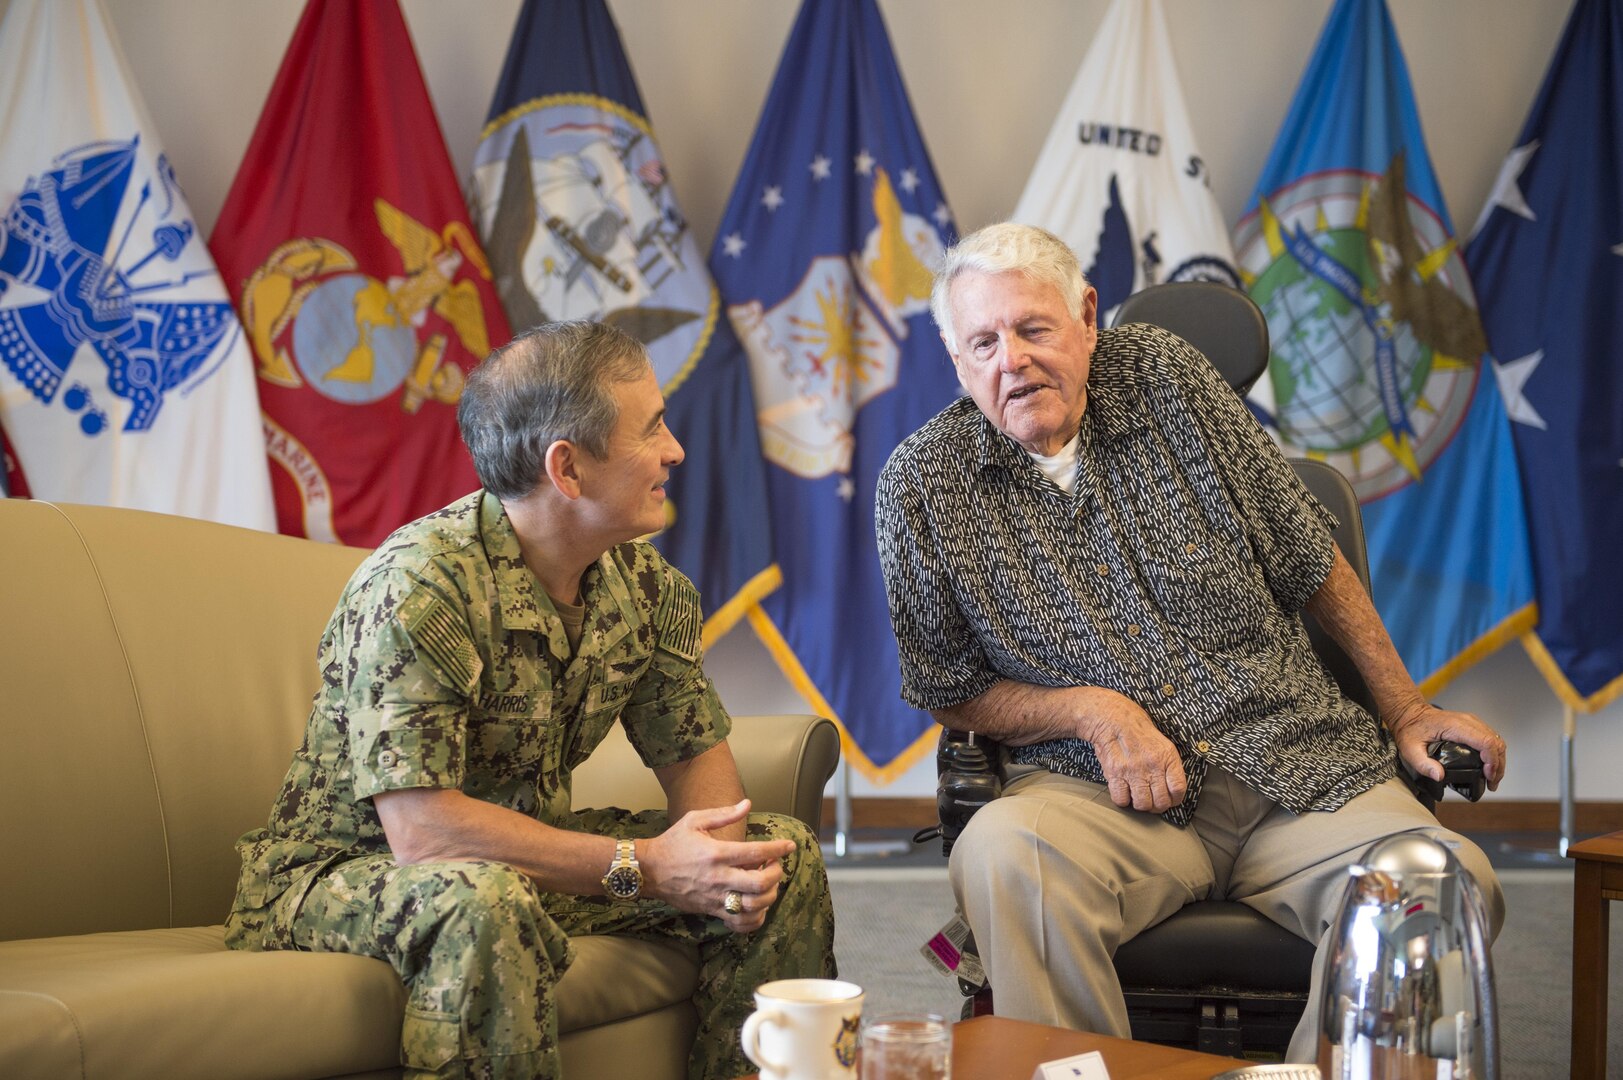 161208-N-DX698-033 CAMP H.M. SMITH, Hawaii (Dec. 8, 2016) Commander, U.S. Pacific Command, Adm. Harry Harris welcomes the WWII and former POW veteran, Sgt. George Emerson and his wife during their visit to the PACOM headquarters. Emerson was invited on behalf of Harris after he was unable to attend the official 75th Anniversary Commemoration on Dec. 7th in Pearl Harbor. Emerson served in the U.S. Army Air Corps and was captured by German forces when his plane was destroyed during an attack. (U.S. Navy photo by Petty Officer 1st Class Jay M. Chu/Released)